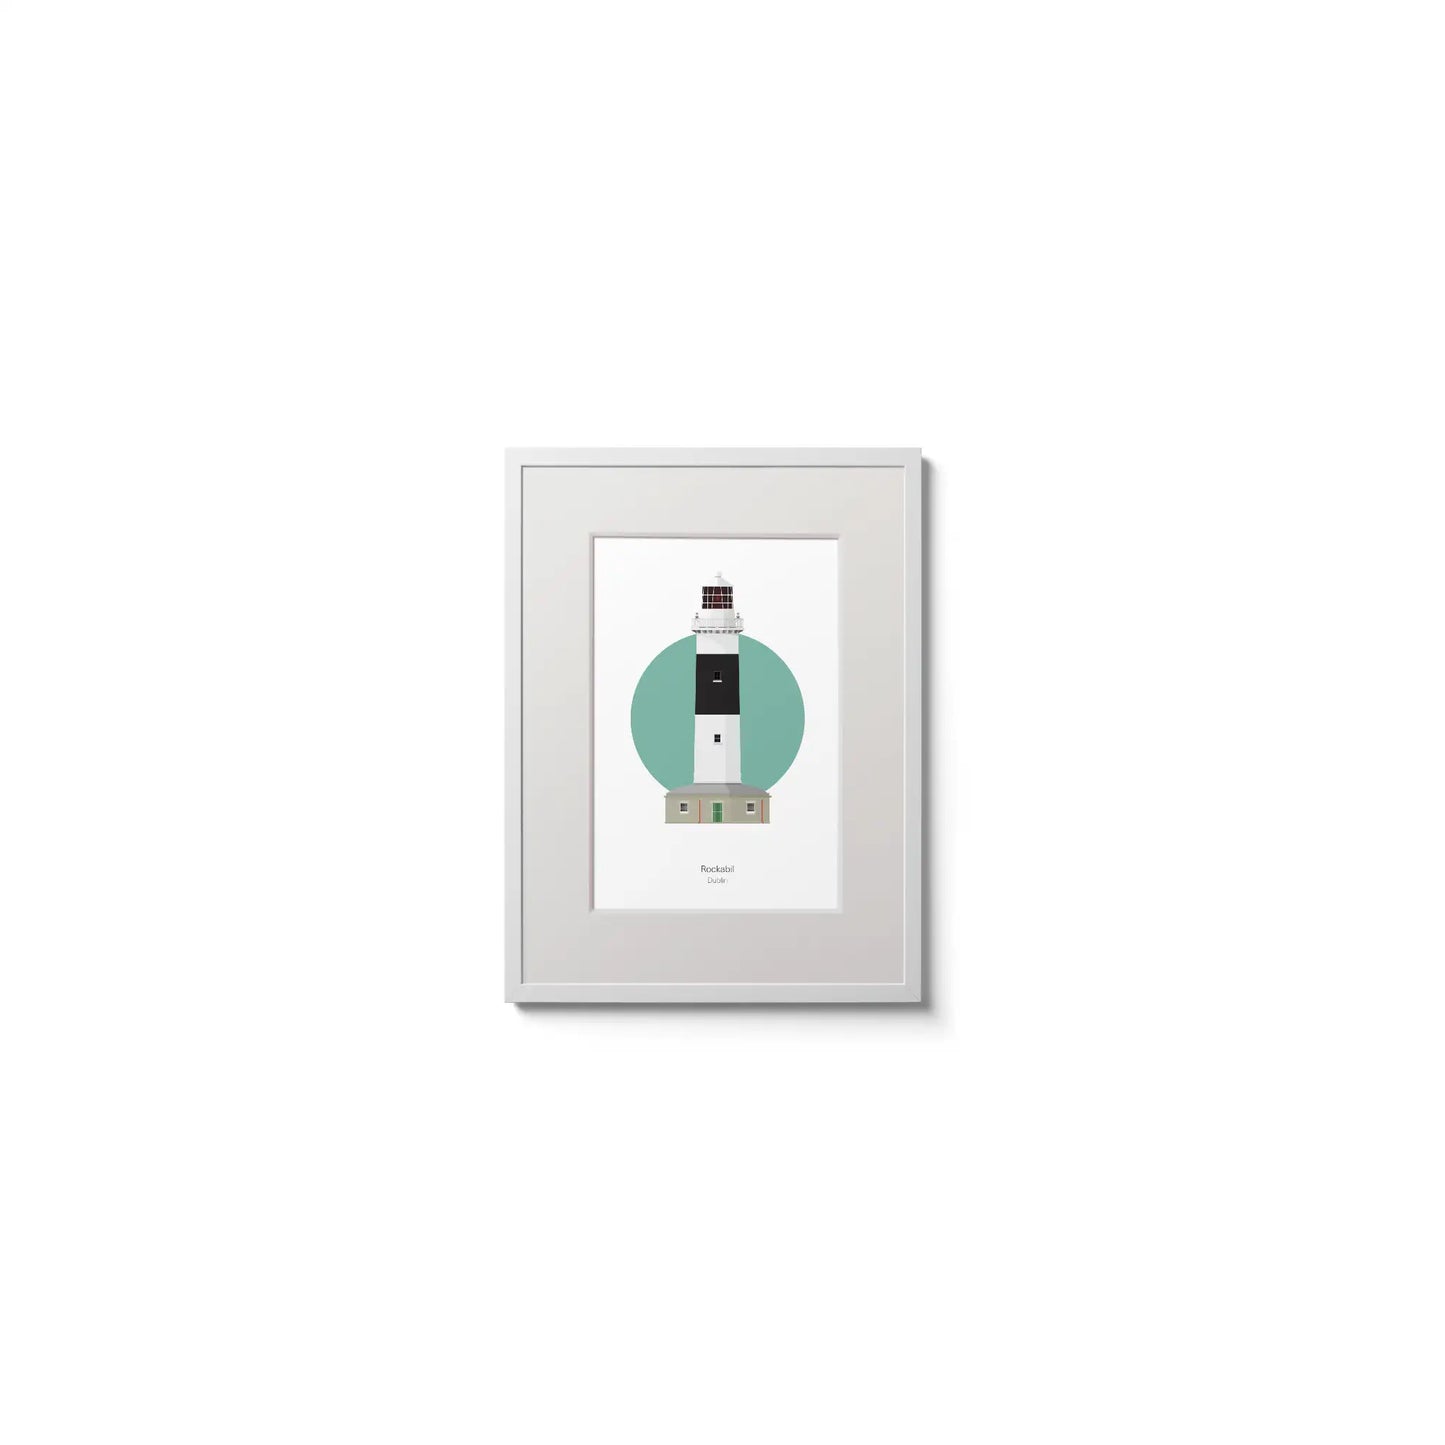 Illustration of Rockabill lighthouse on a white background inside light blue square,  in a white frame measuring 15x20cm.